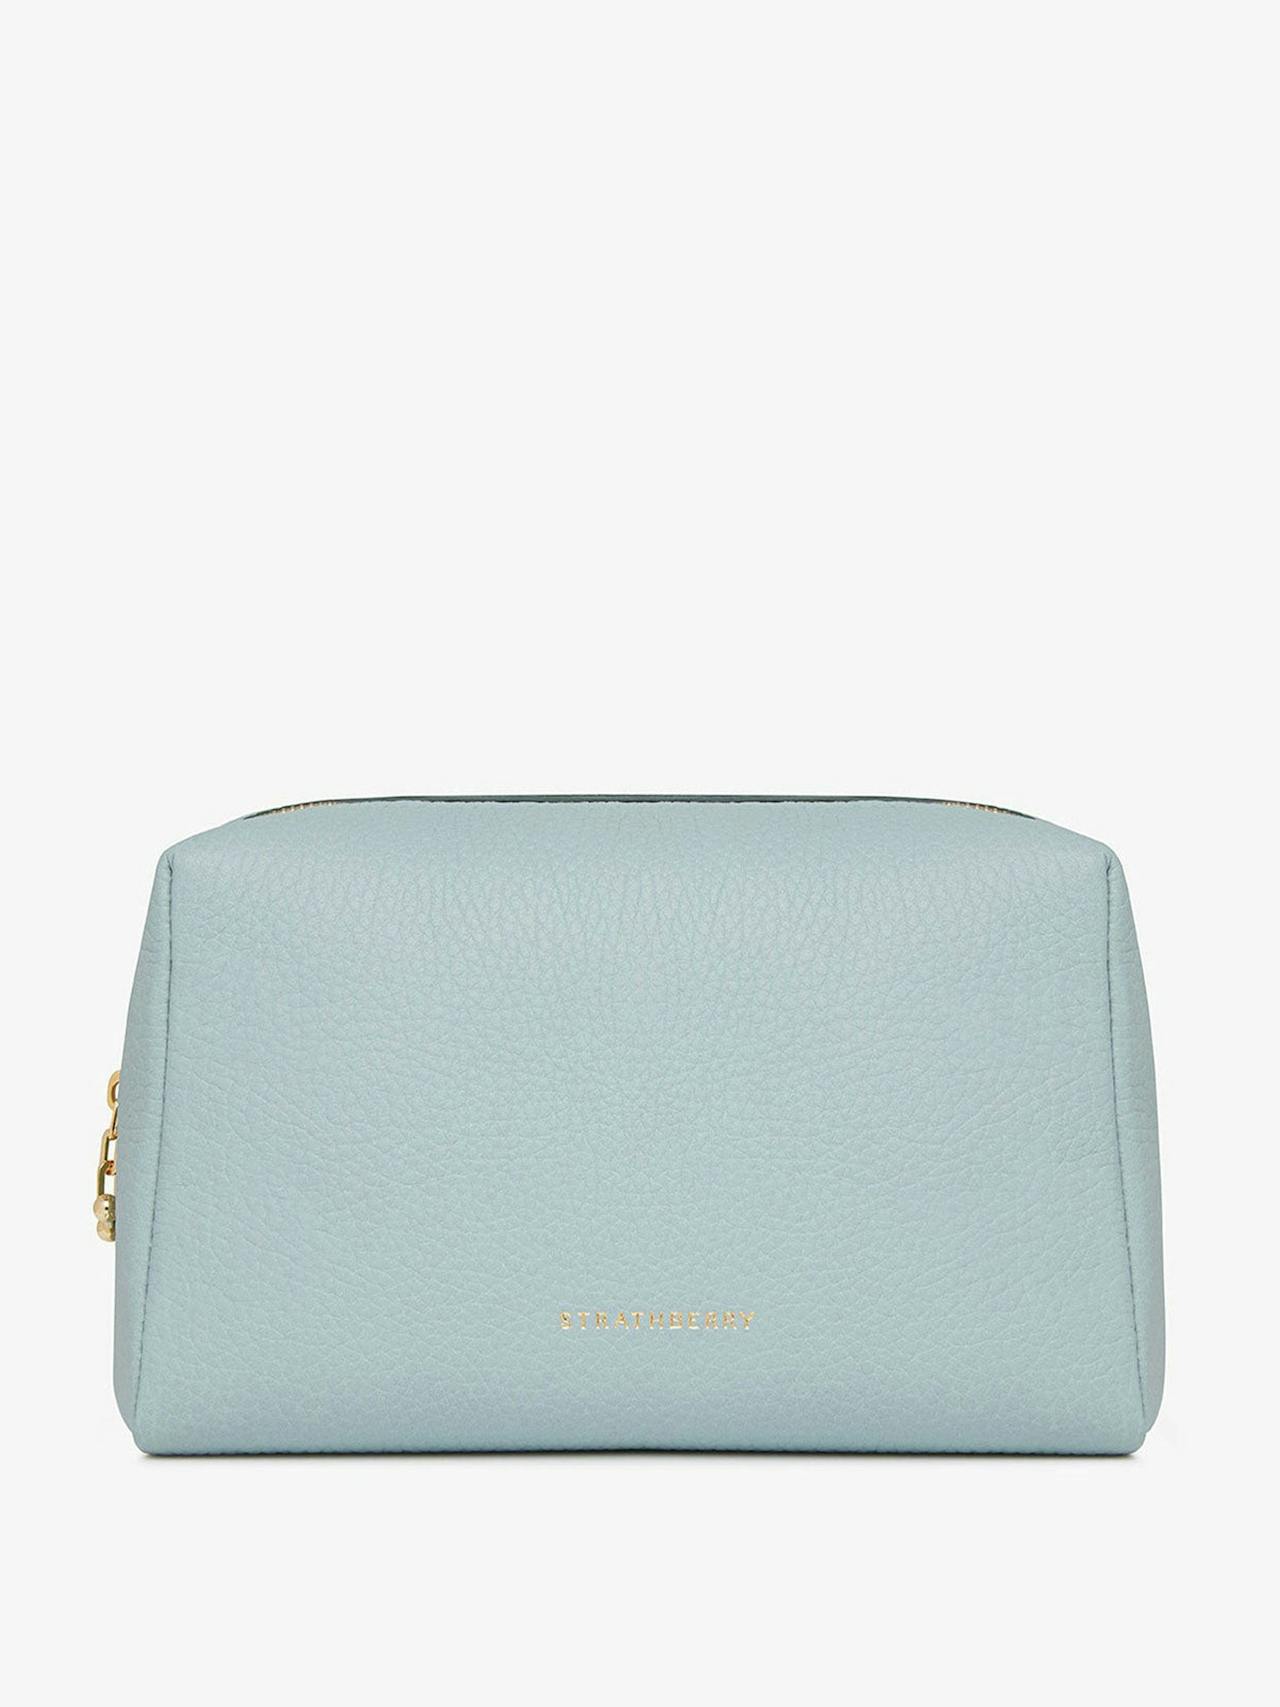 Duck egg blue cosmetic pouch